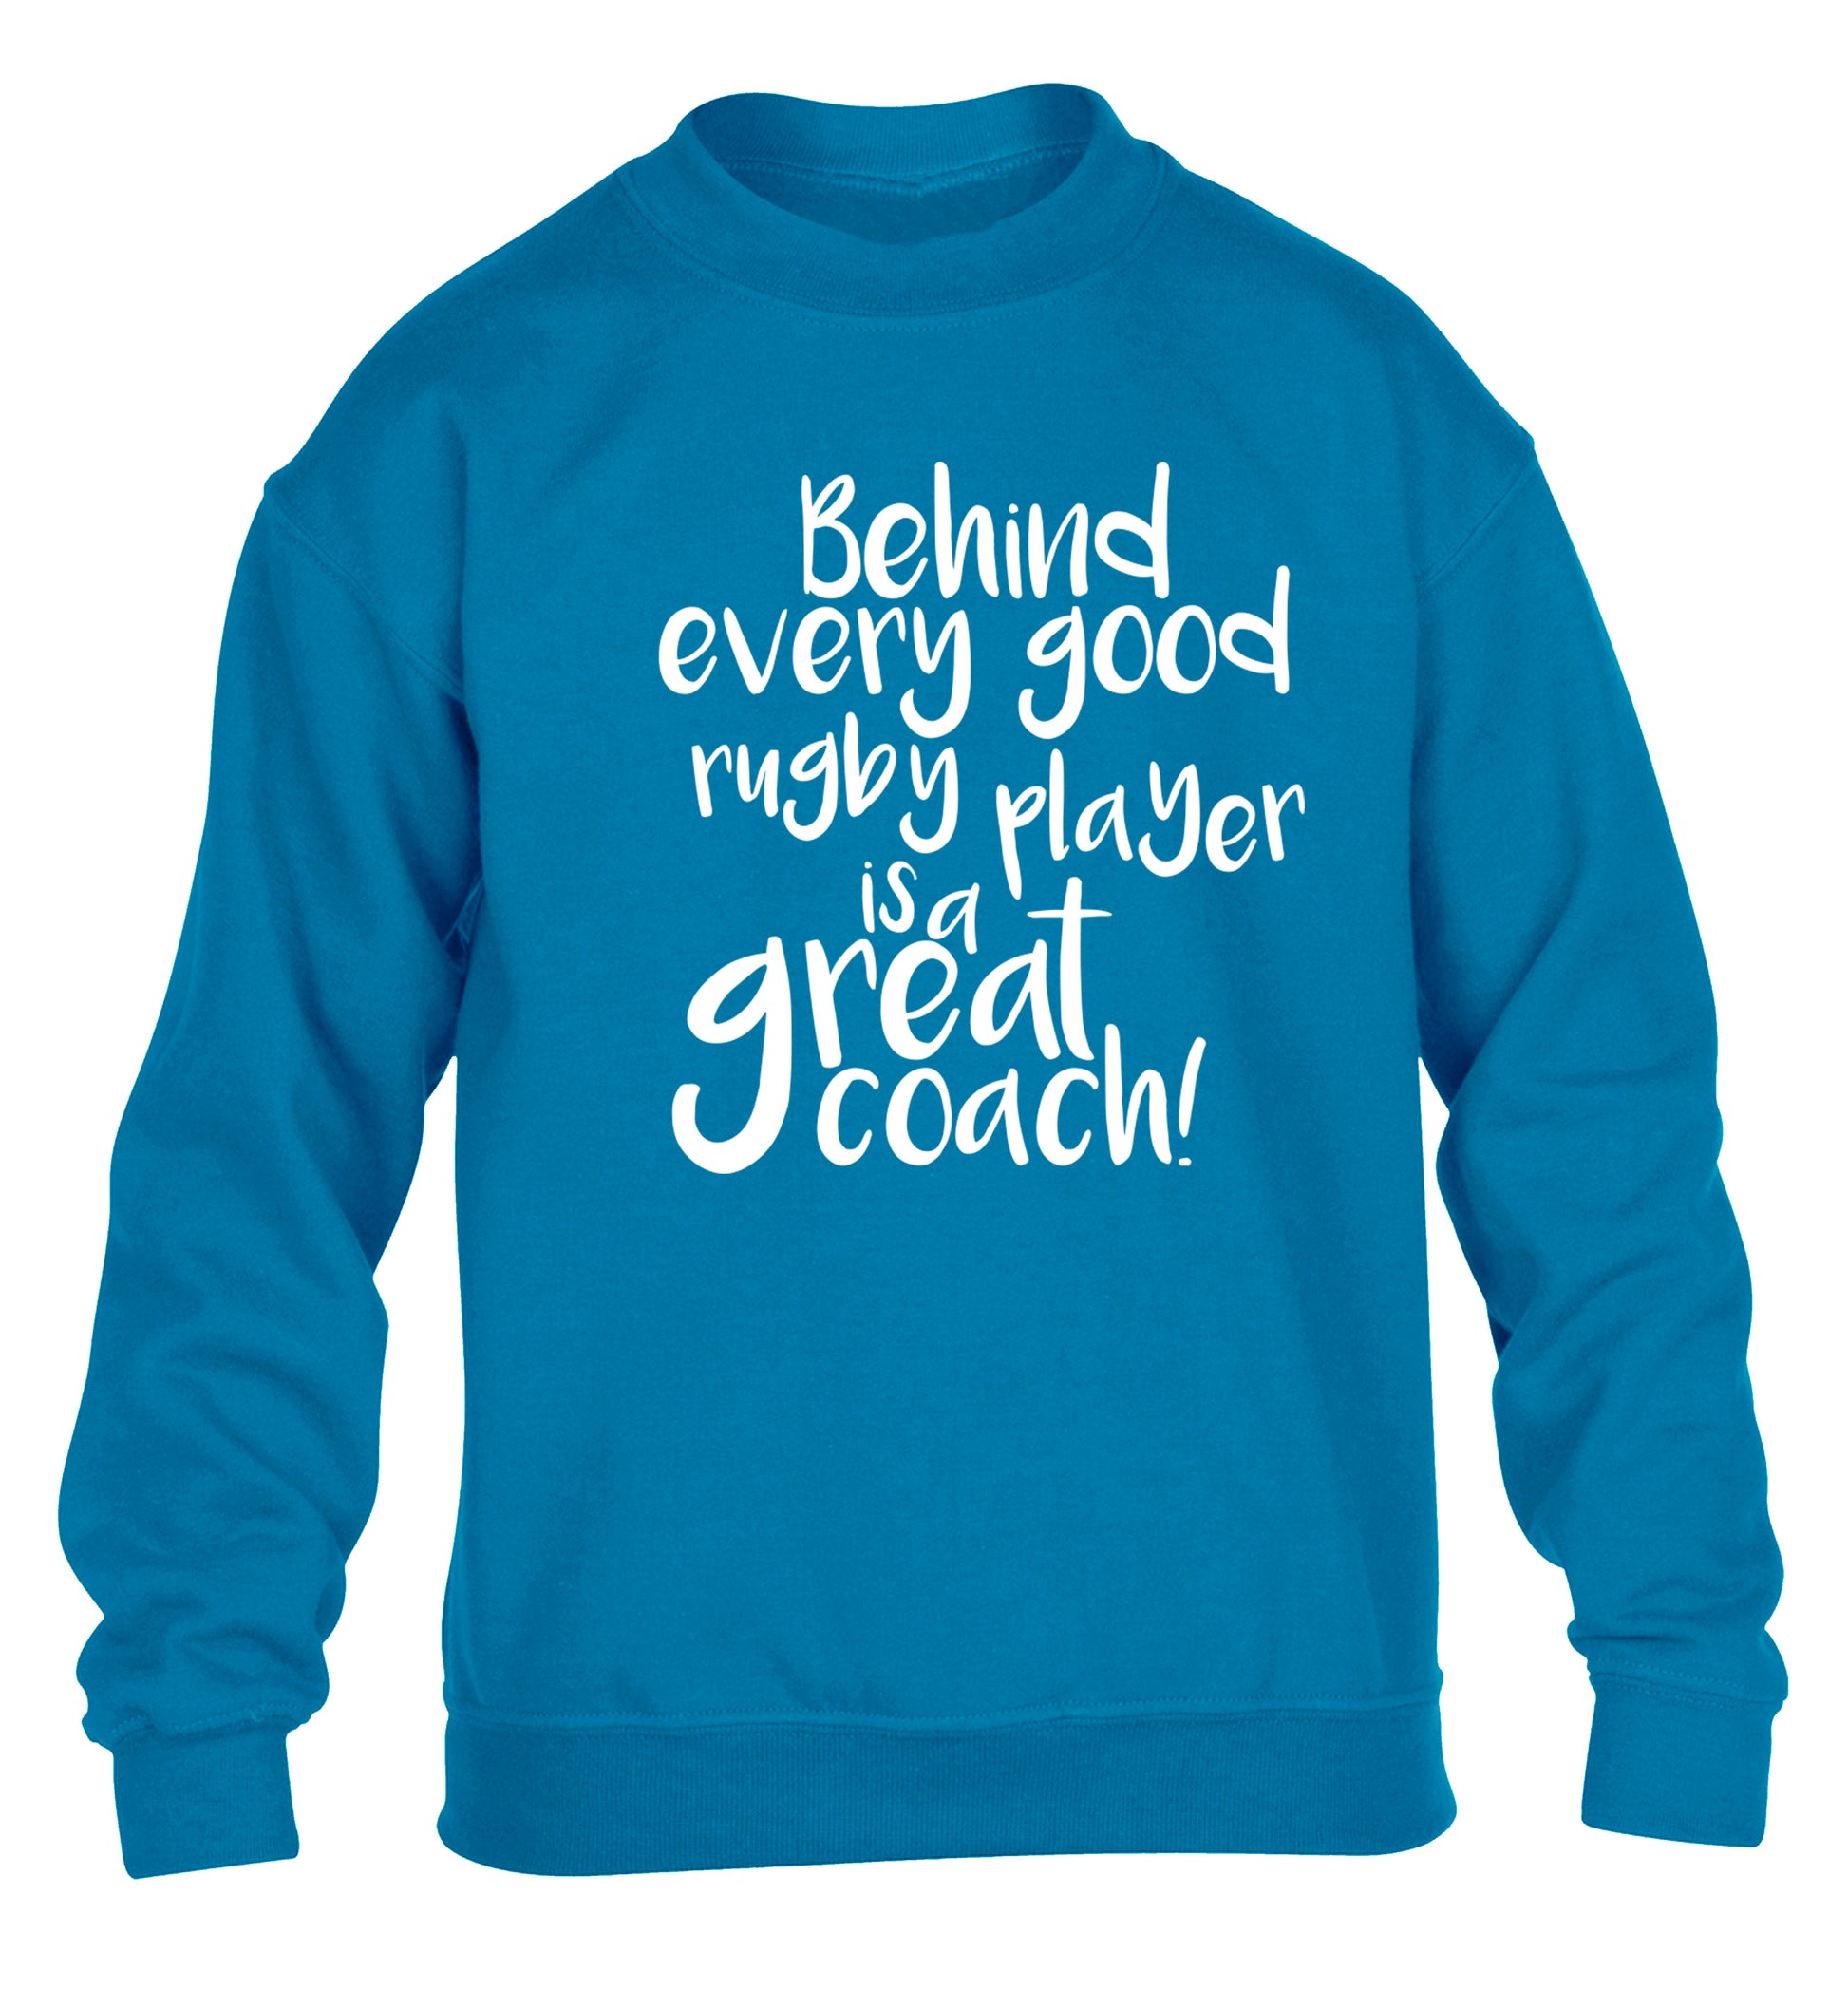 Behind every goor rugby player is a great coach children's blue sweater 12-13 Years